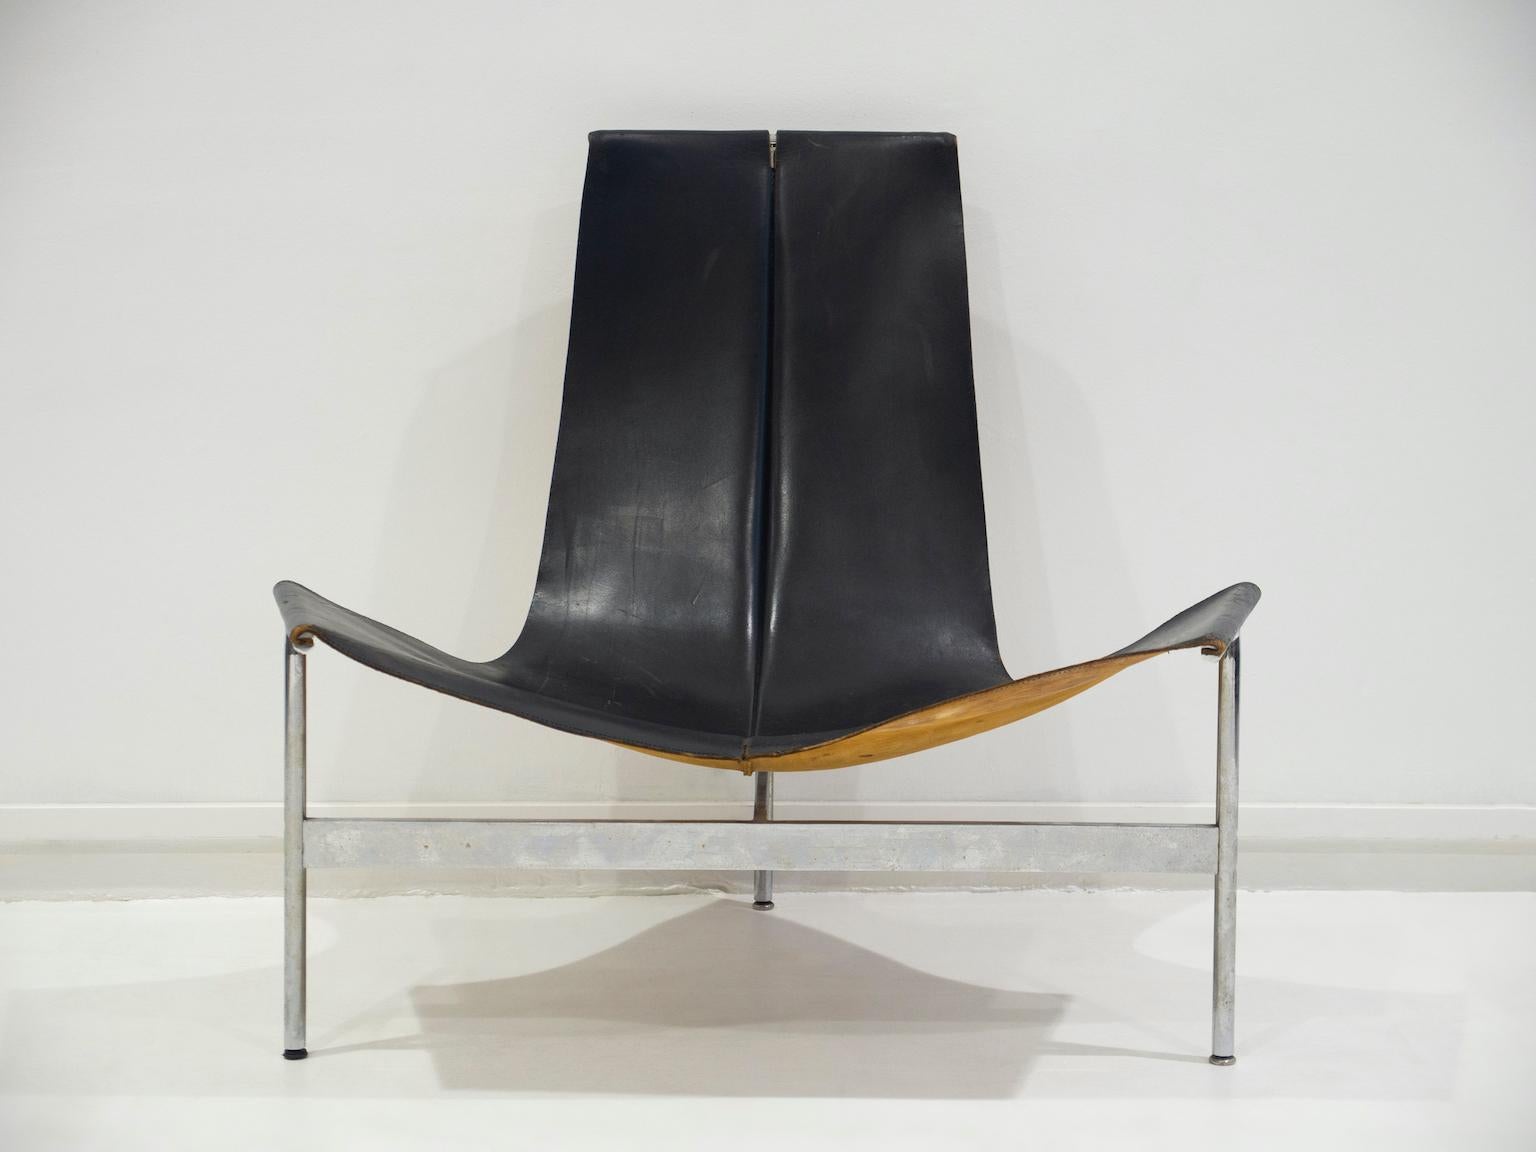 William Katavolos, together with Douglas Kelley & Ross Littell, designed the iconic model 3LC or T-chair for Laverne International in 1952. The T-chair is exhibited in the permanent collection of the Museum of Modern Art in New York.
On this chair,